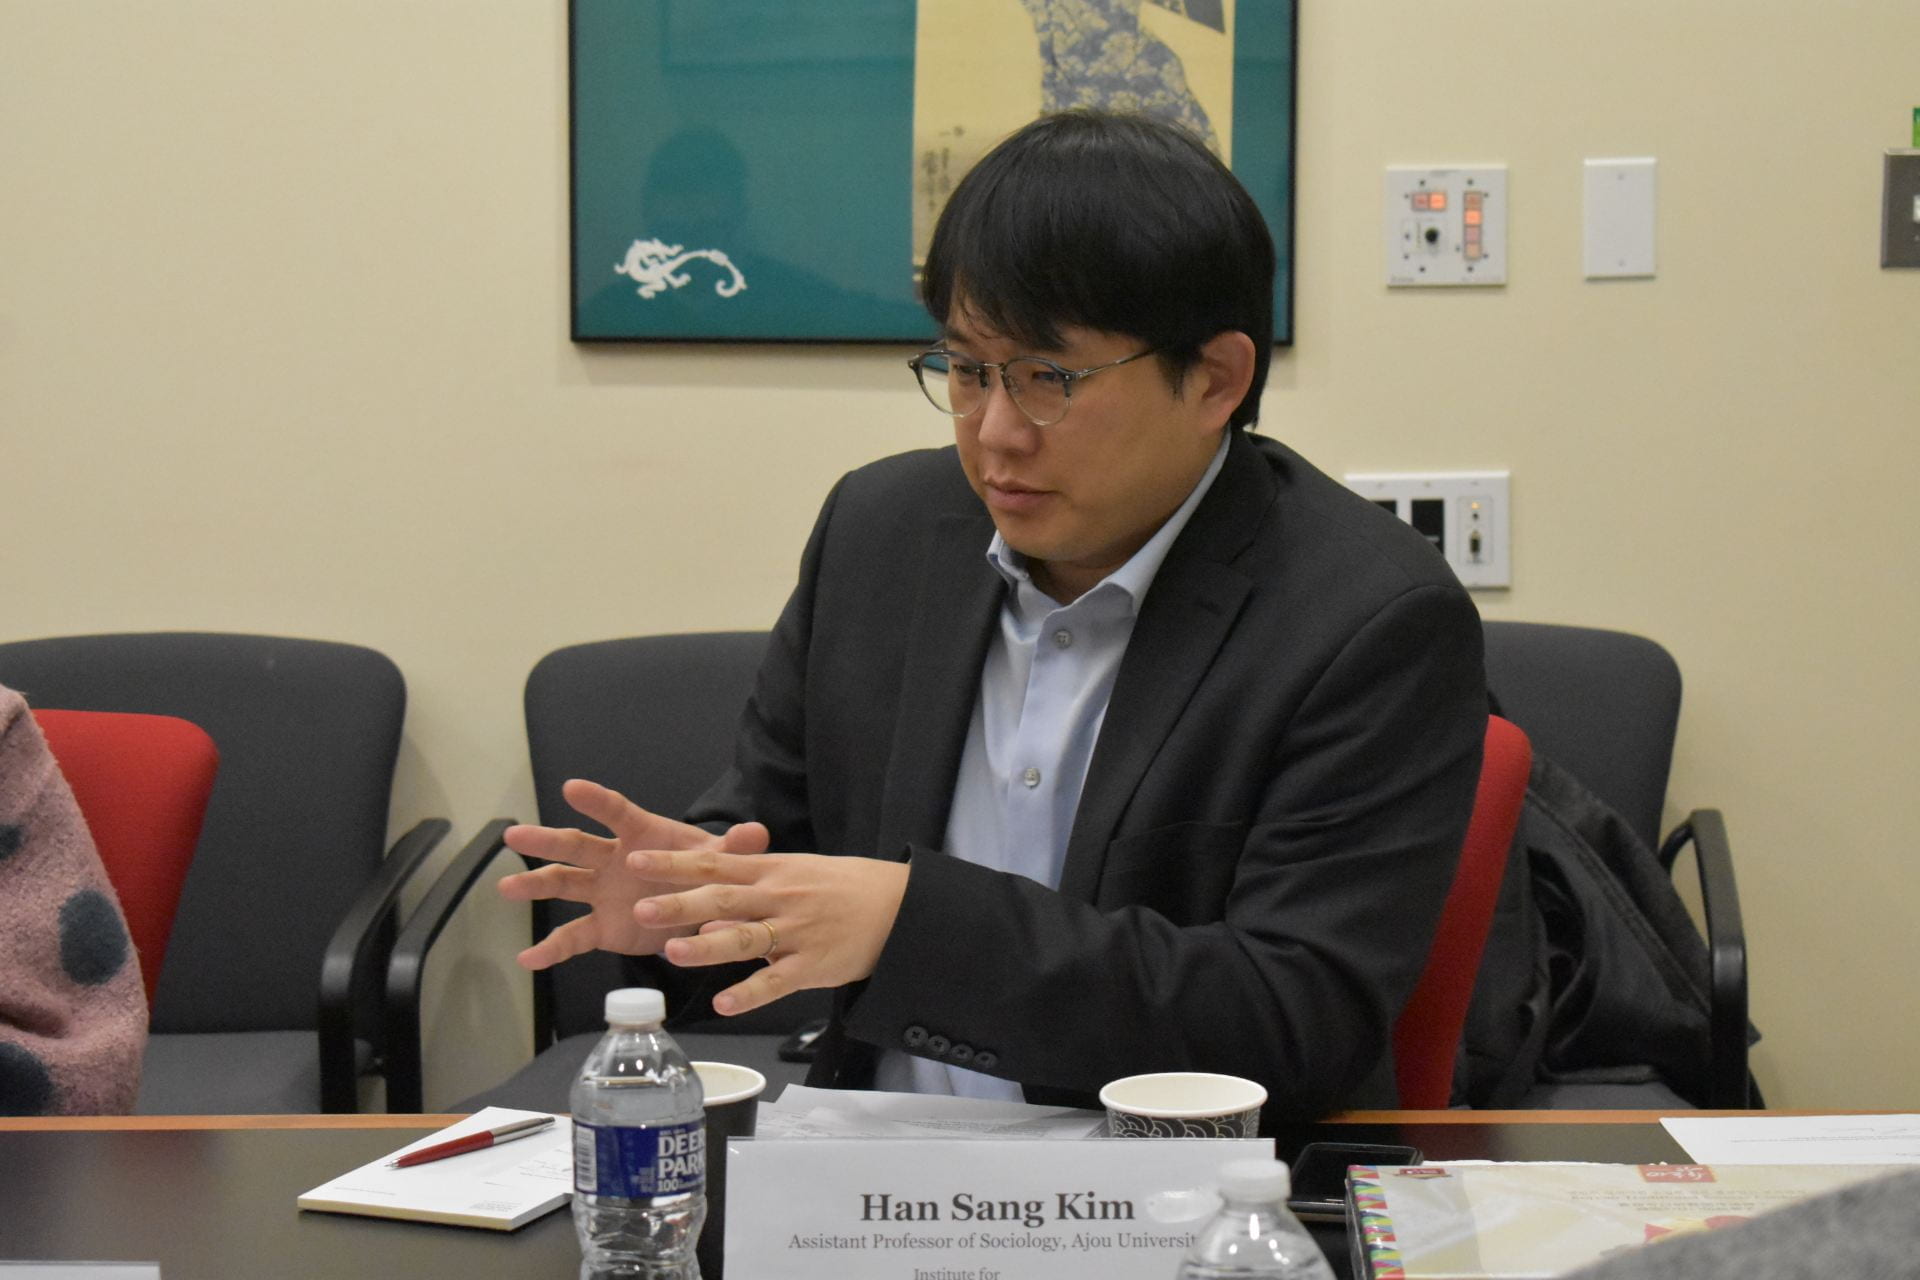 Han Sang Kim speaking to the audience during the Book Manuscript Workshop